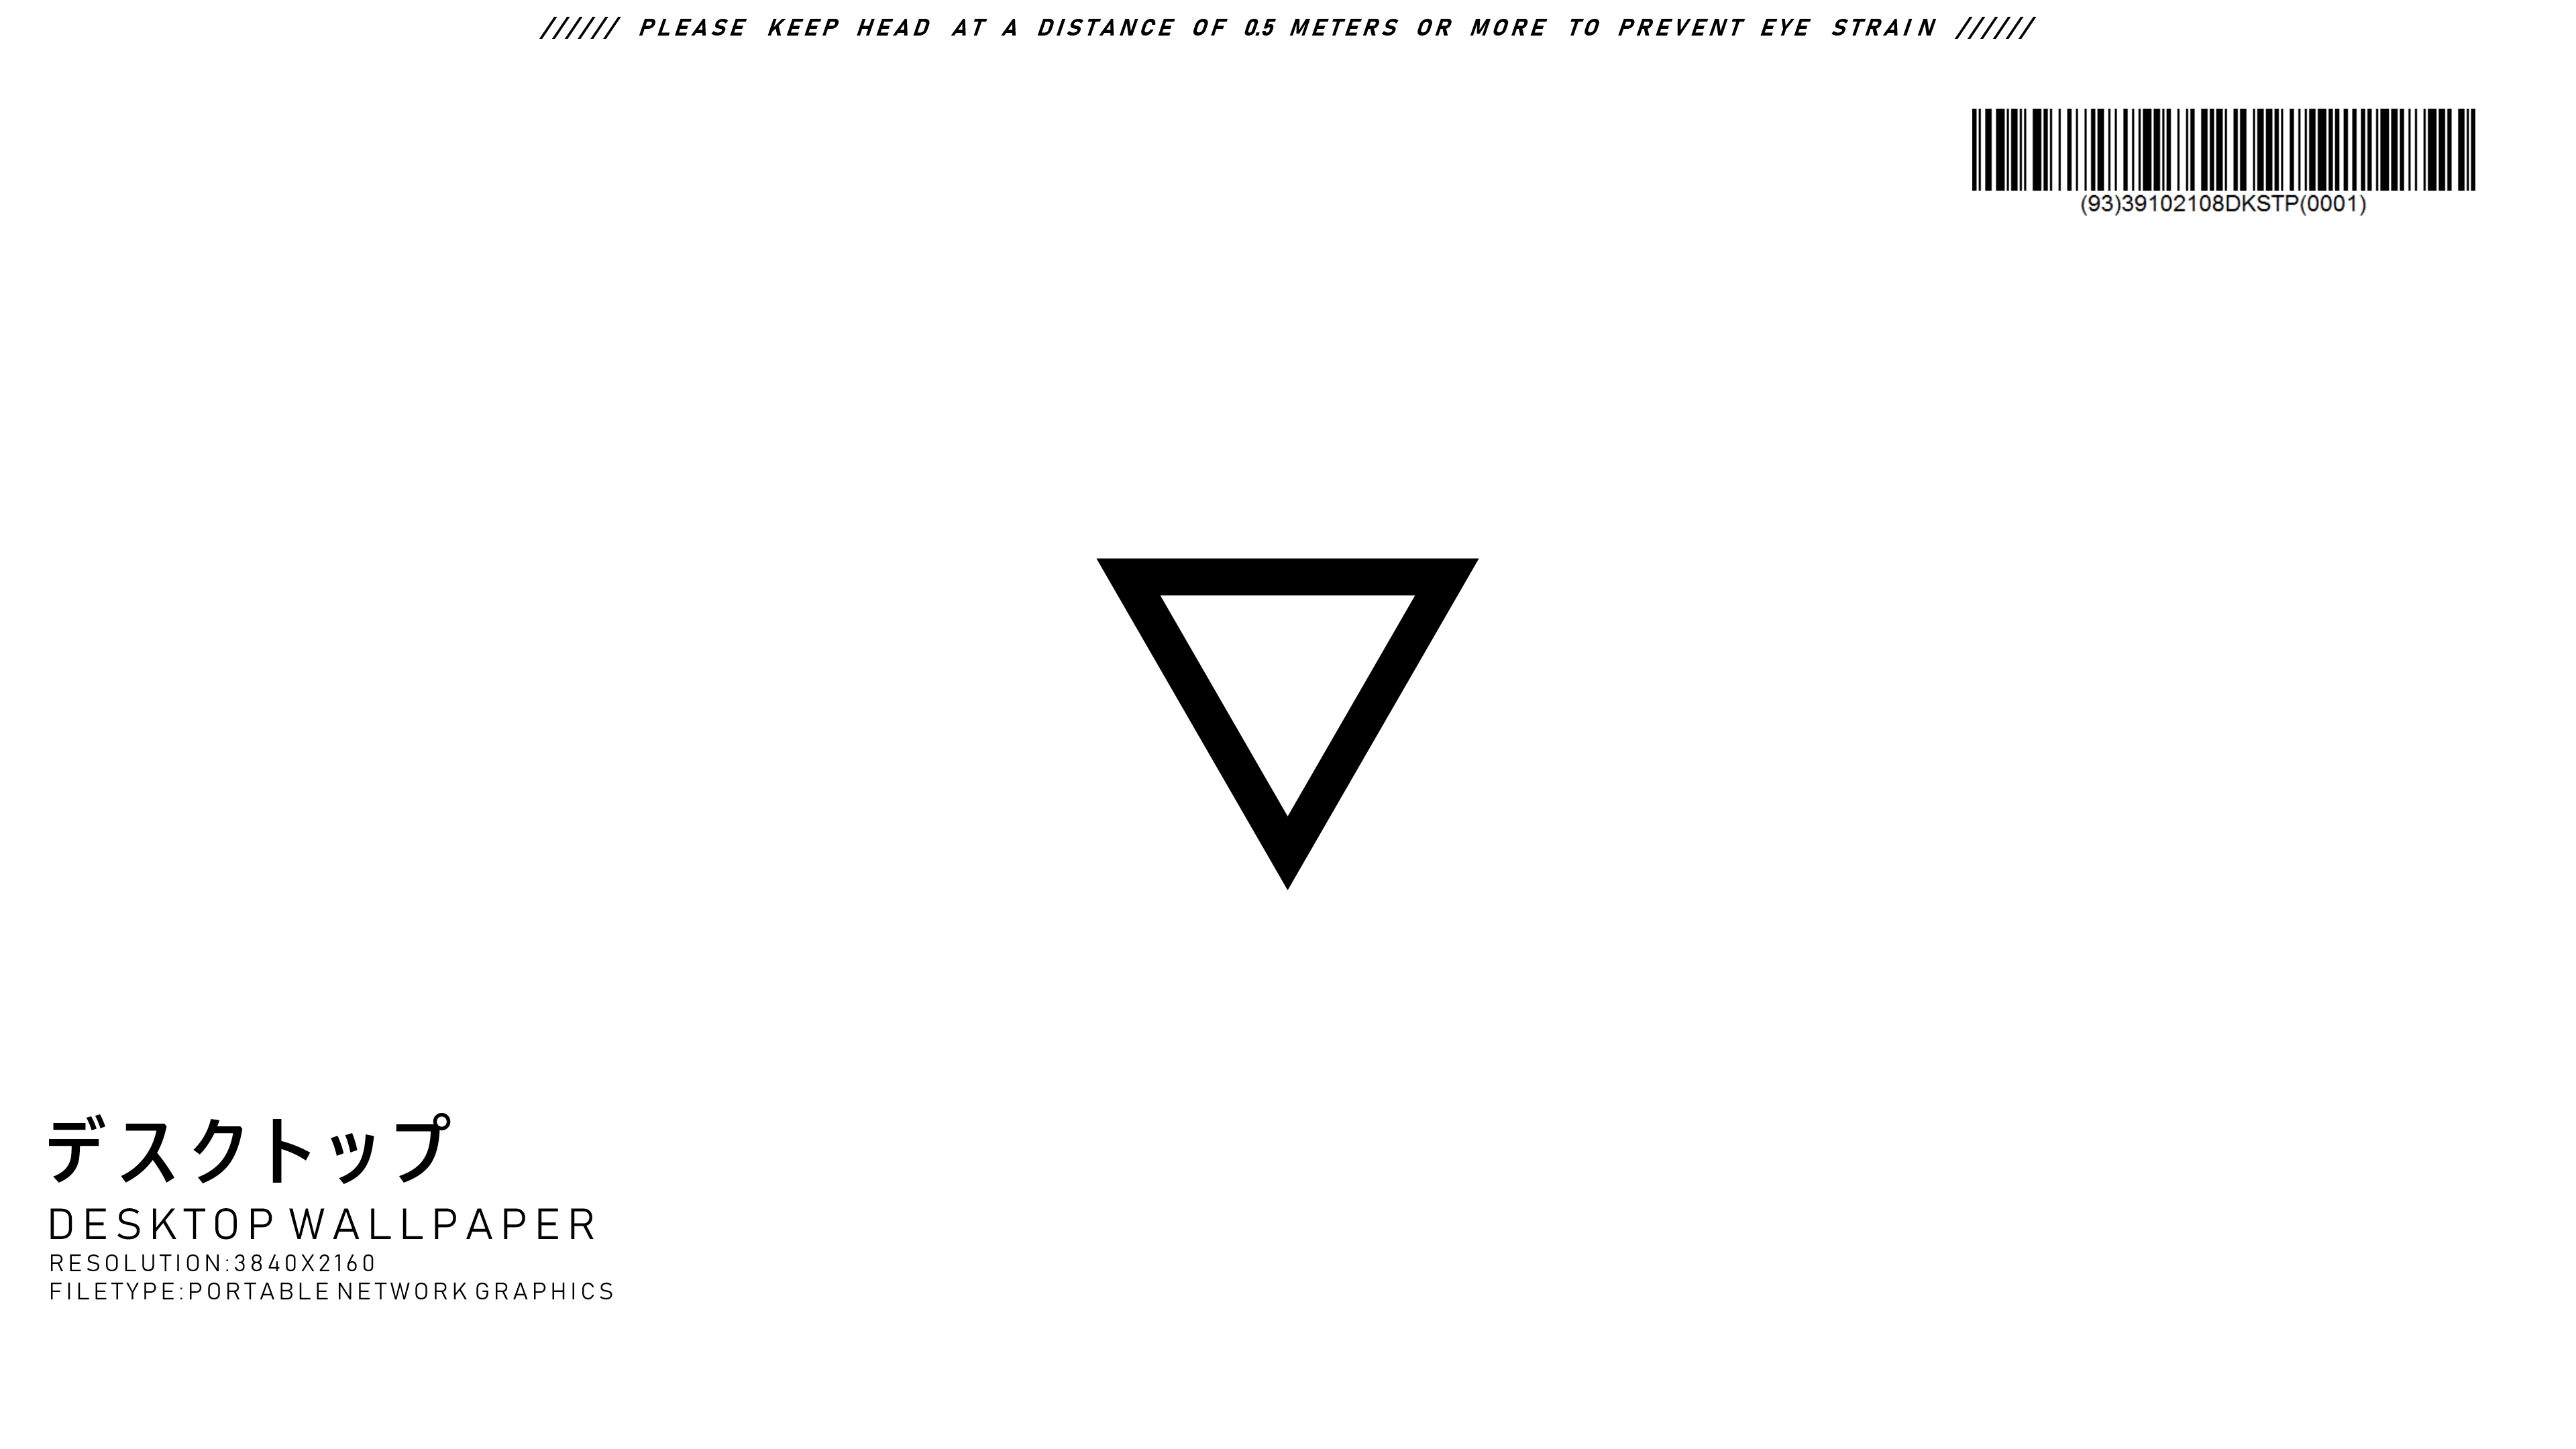 I created a futuristic / cyberpunk themed minimalist wallpaper. [3840 x 2160] (Inverse colors available upon request)